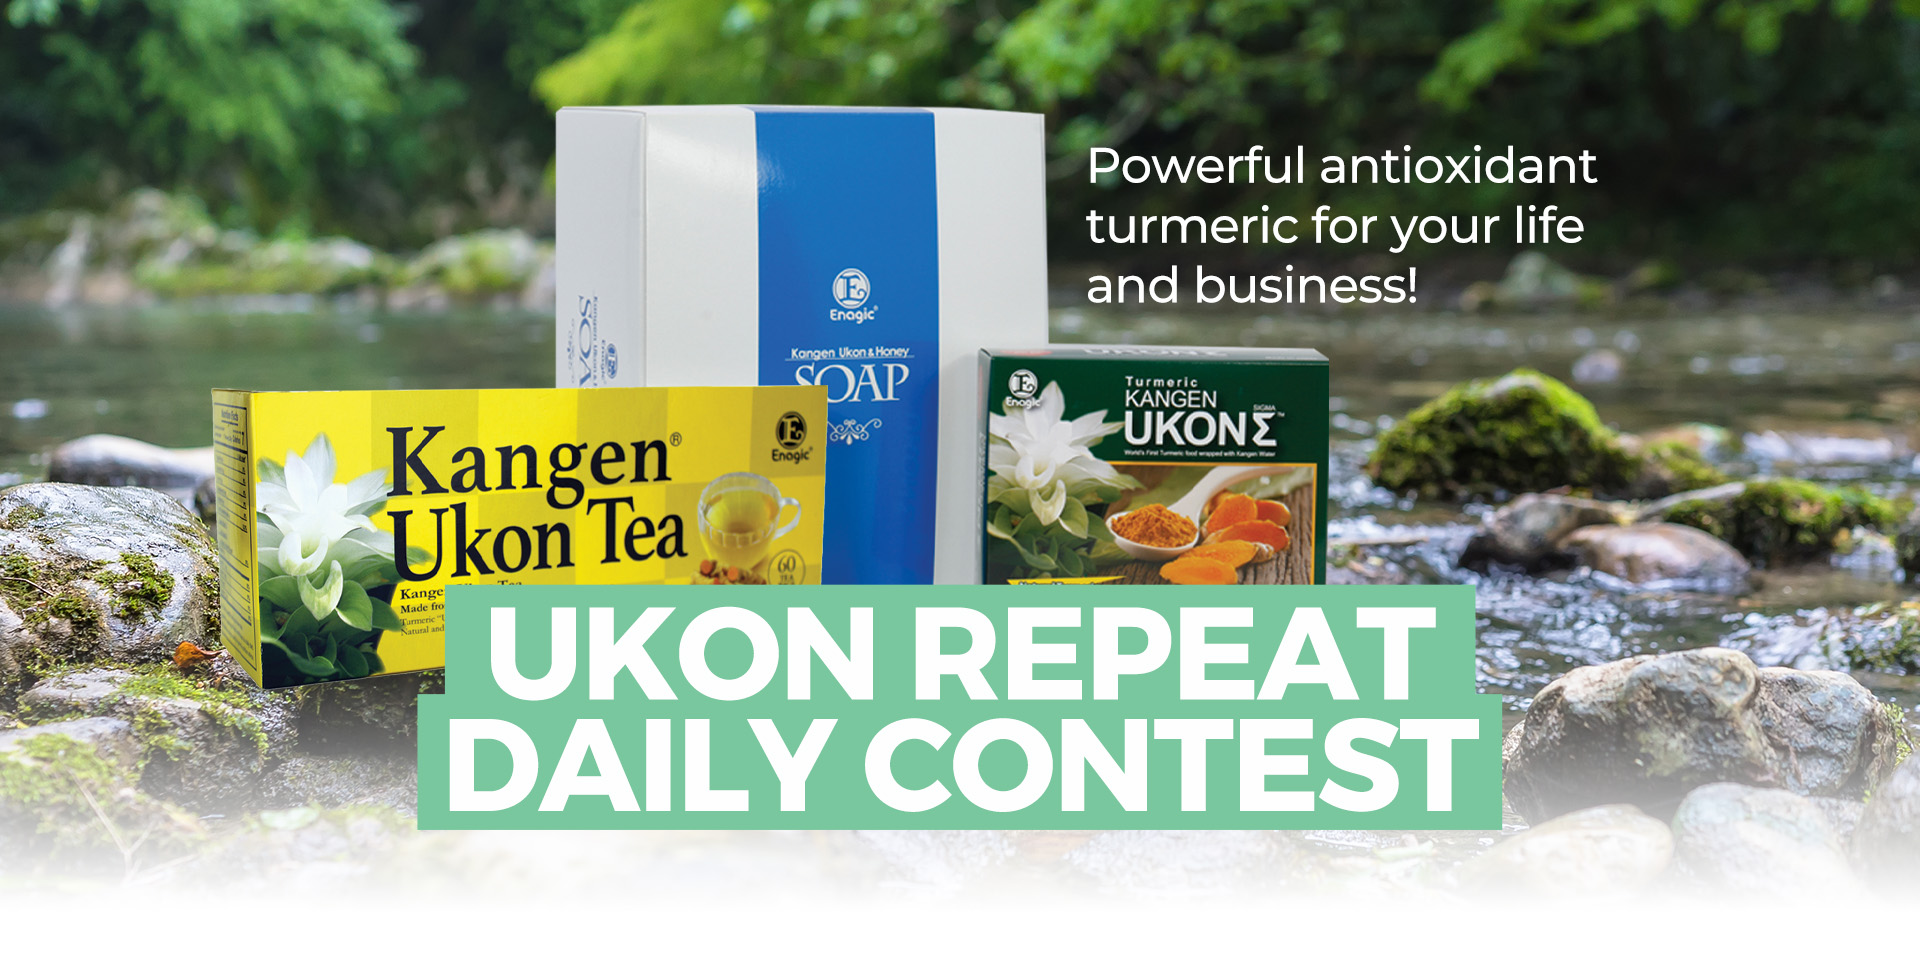 Two Ukon Contests